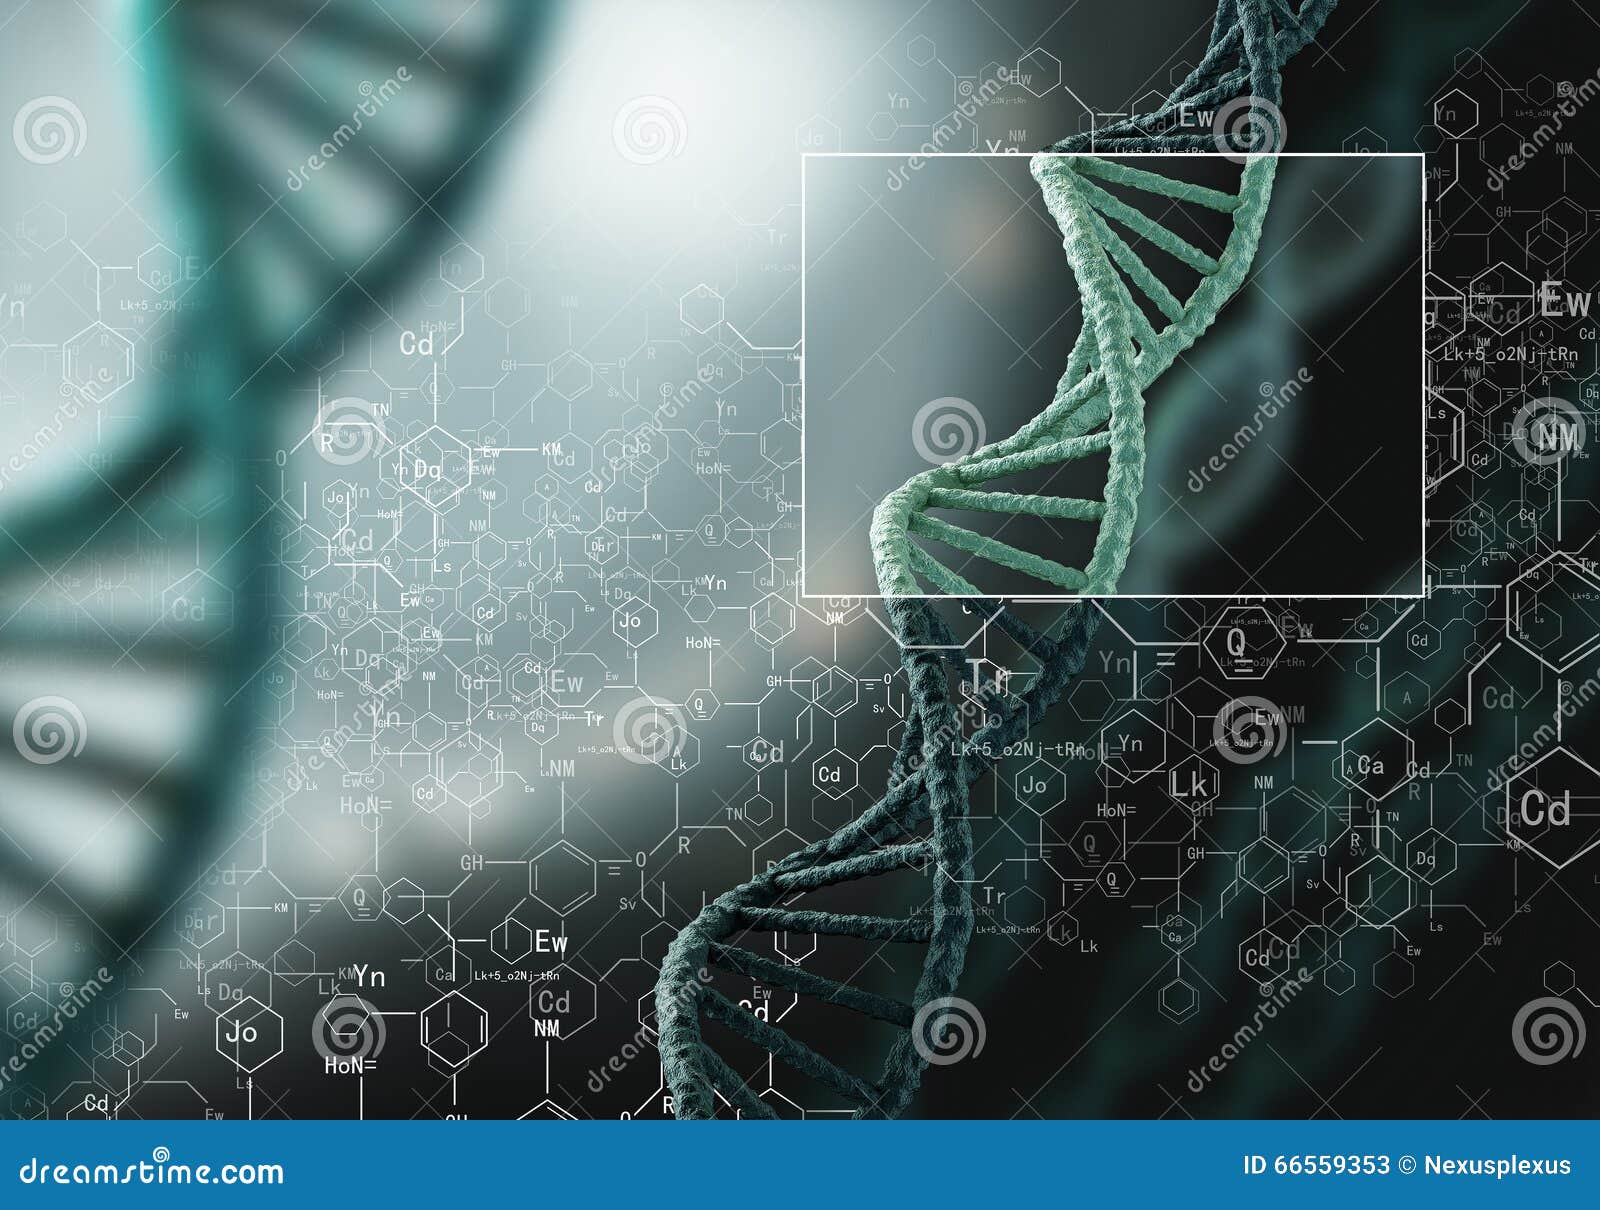 Biotechnology Research Stock Image Image of health